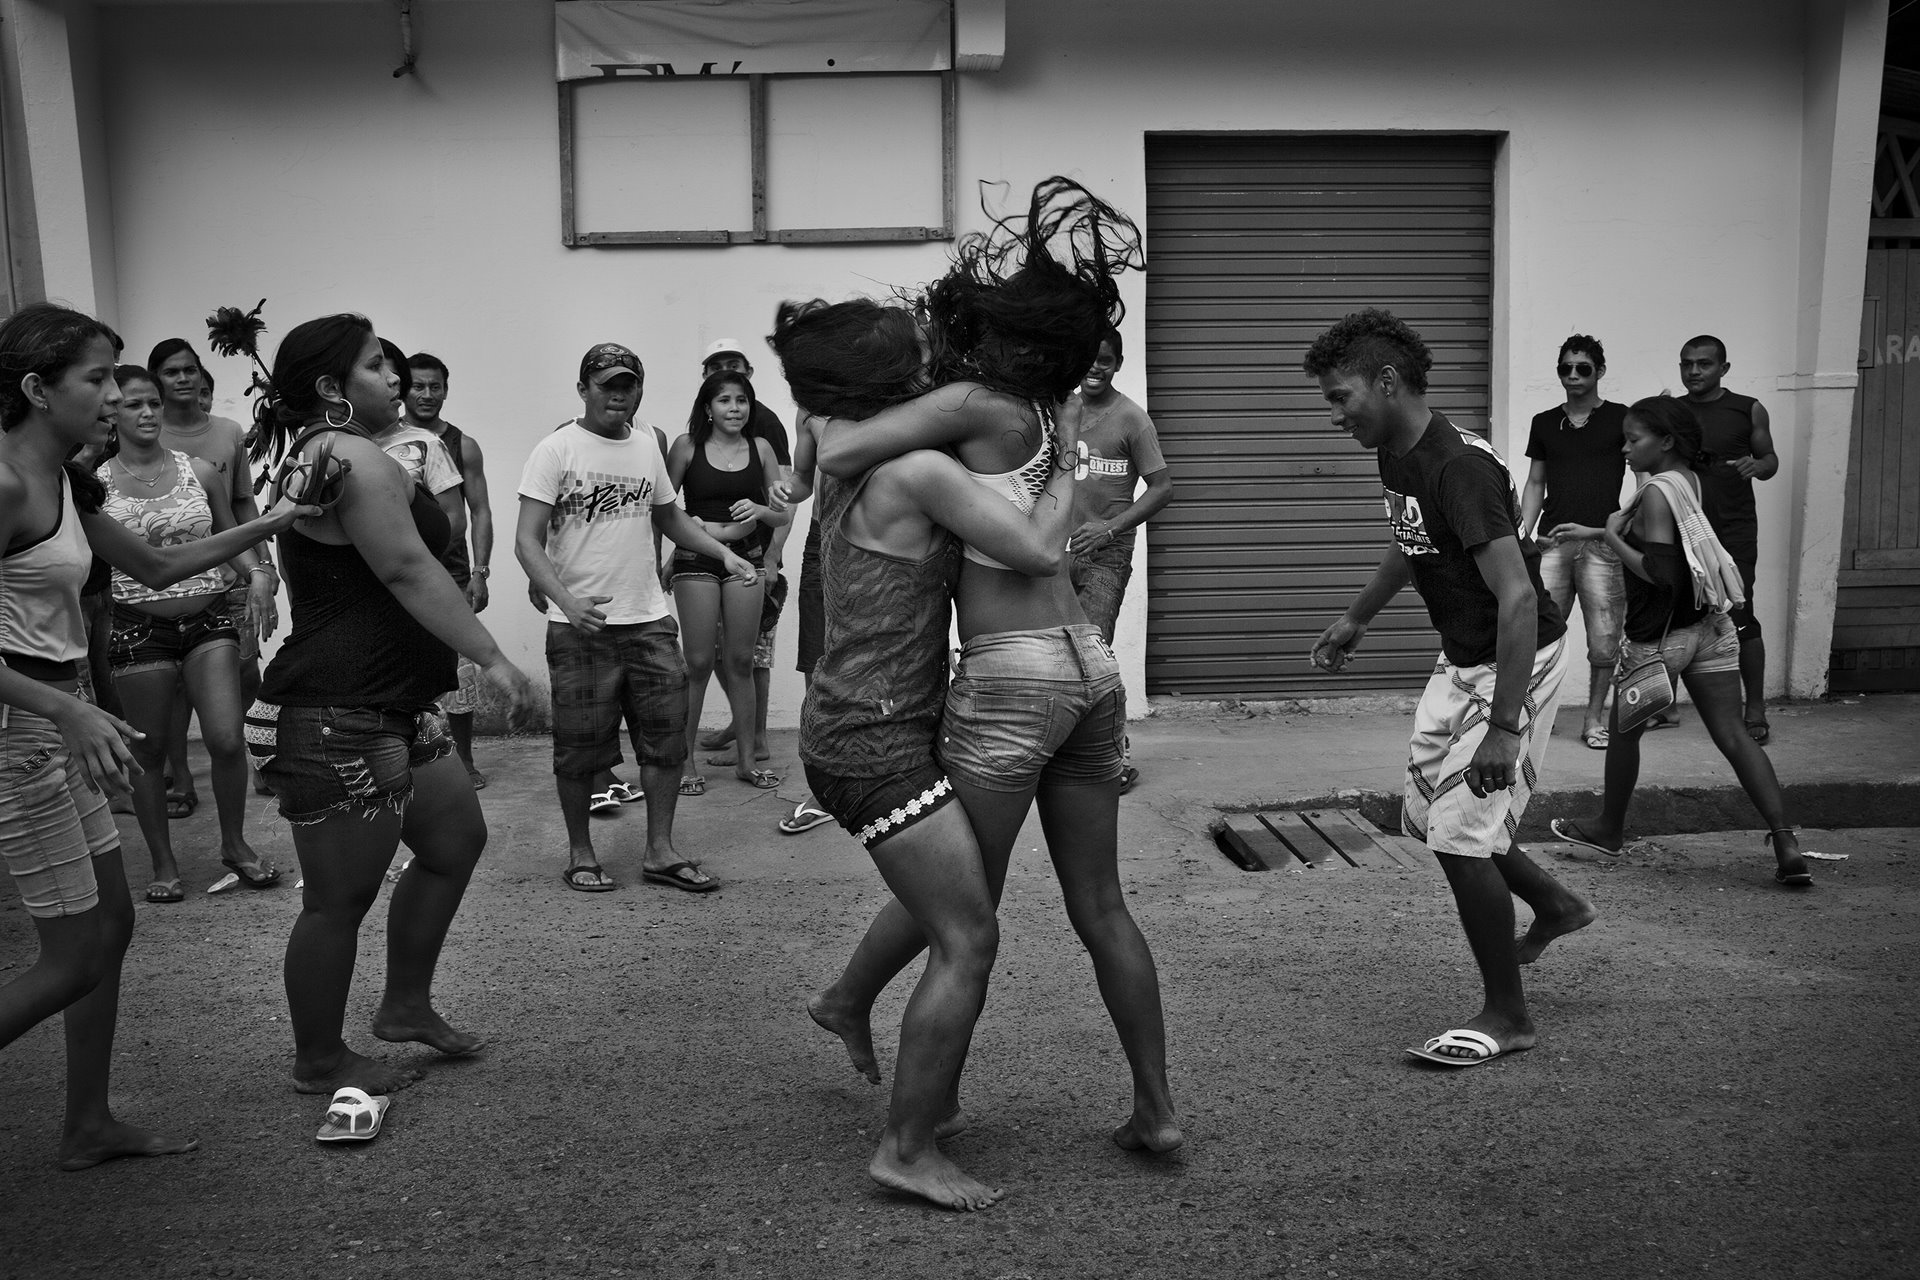 A fight breaks out between two women after a party in the Xingu river bank in Altamira, in Pará, in the Brazilian Amazon. Construction work on the Belo Monte Dam generated a surge of migrant labor to the region. The population of Altamira grew from 100,000 to more than 150,000 in just two years, the vast majority of the increase being single men. Violence increased in the town, which faced a serious housing deficit and inadequate sanitation, as well as social issues such as prostitution.